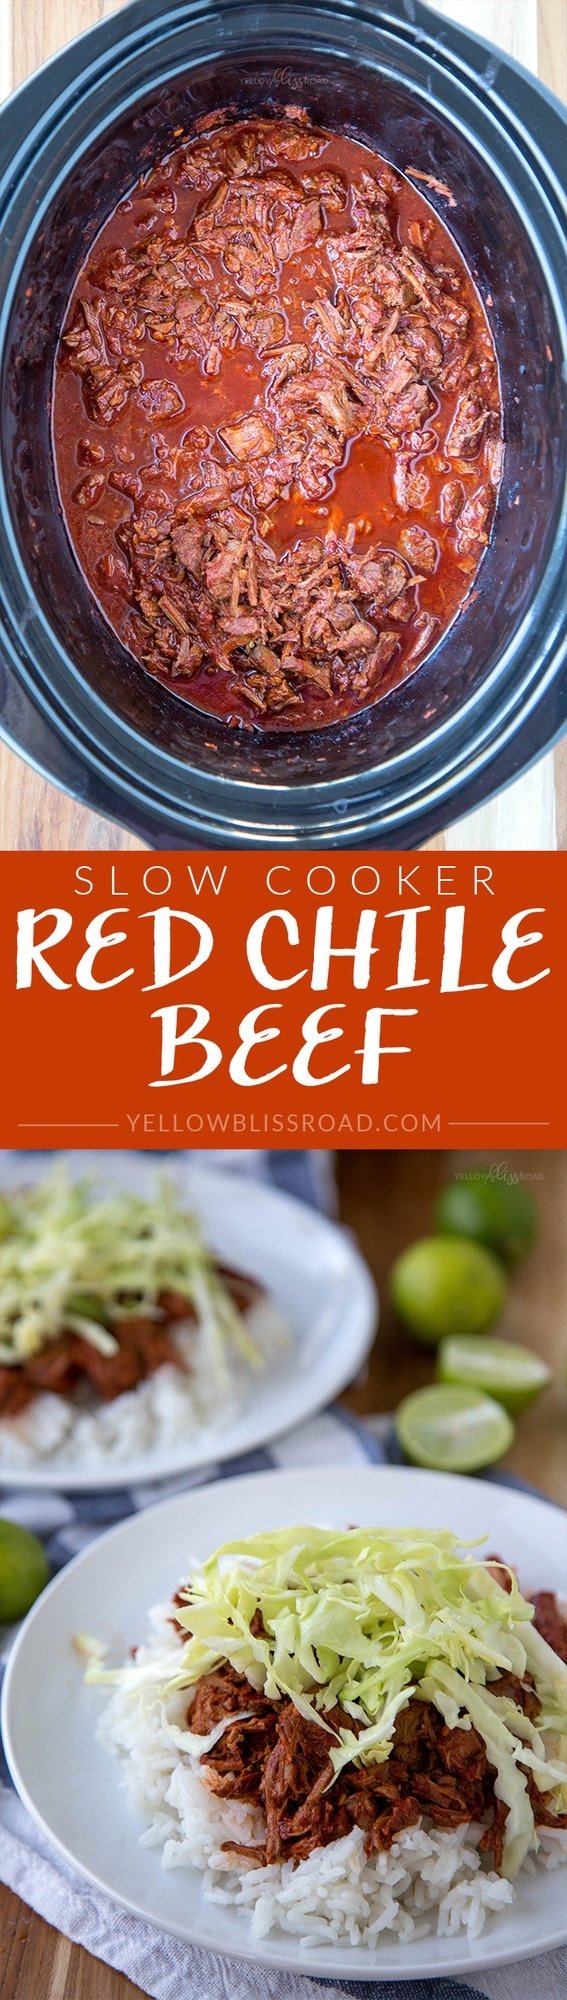 Slow Cooker Red Chile Beef - a delicious and authentic Mexican recipe